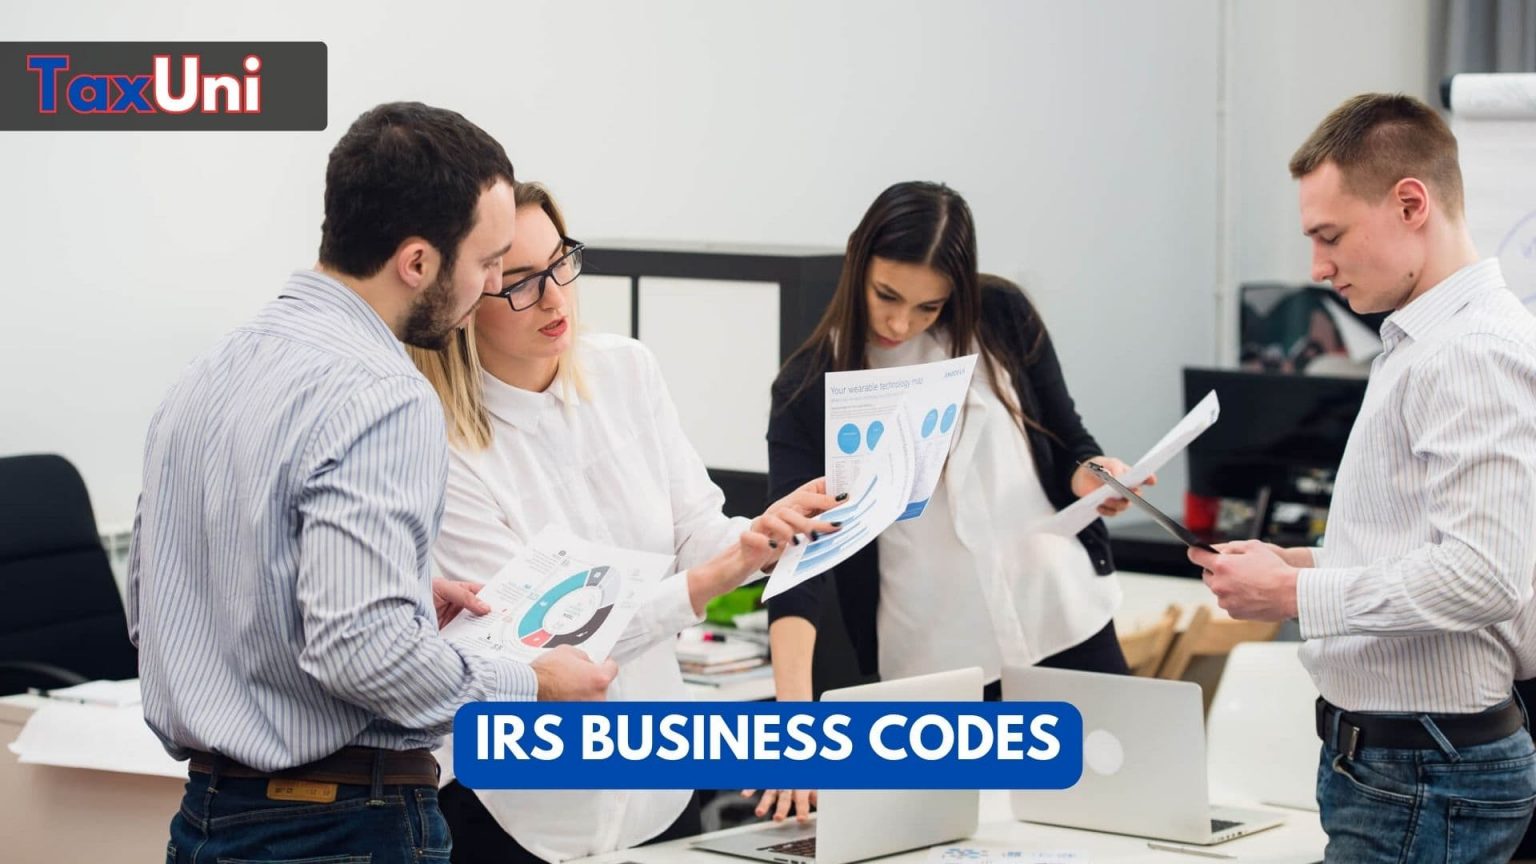 IRS Business Codes